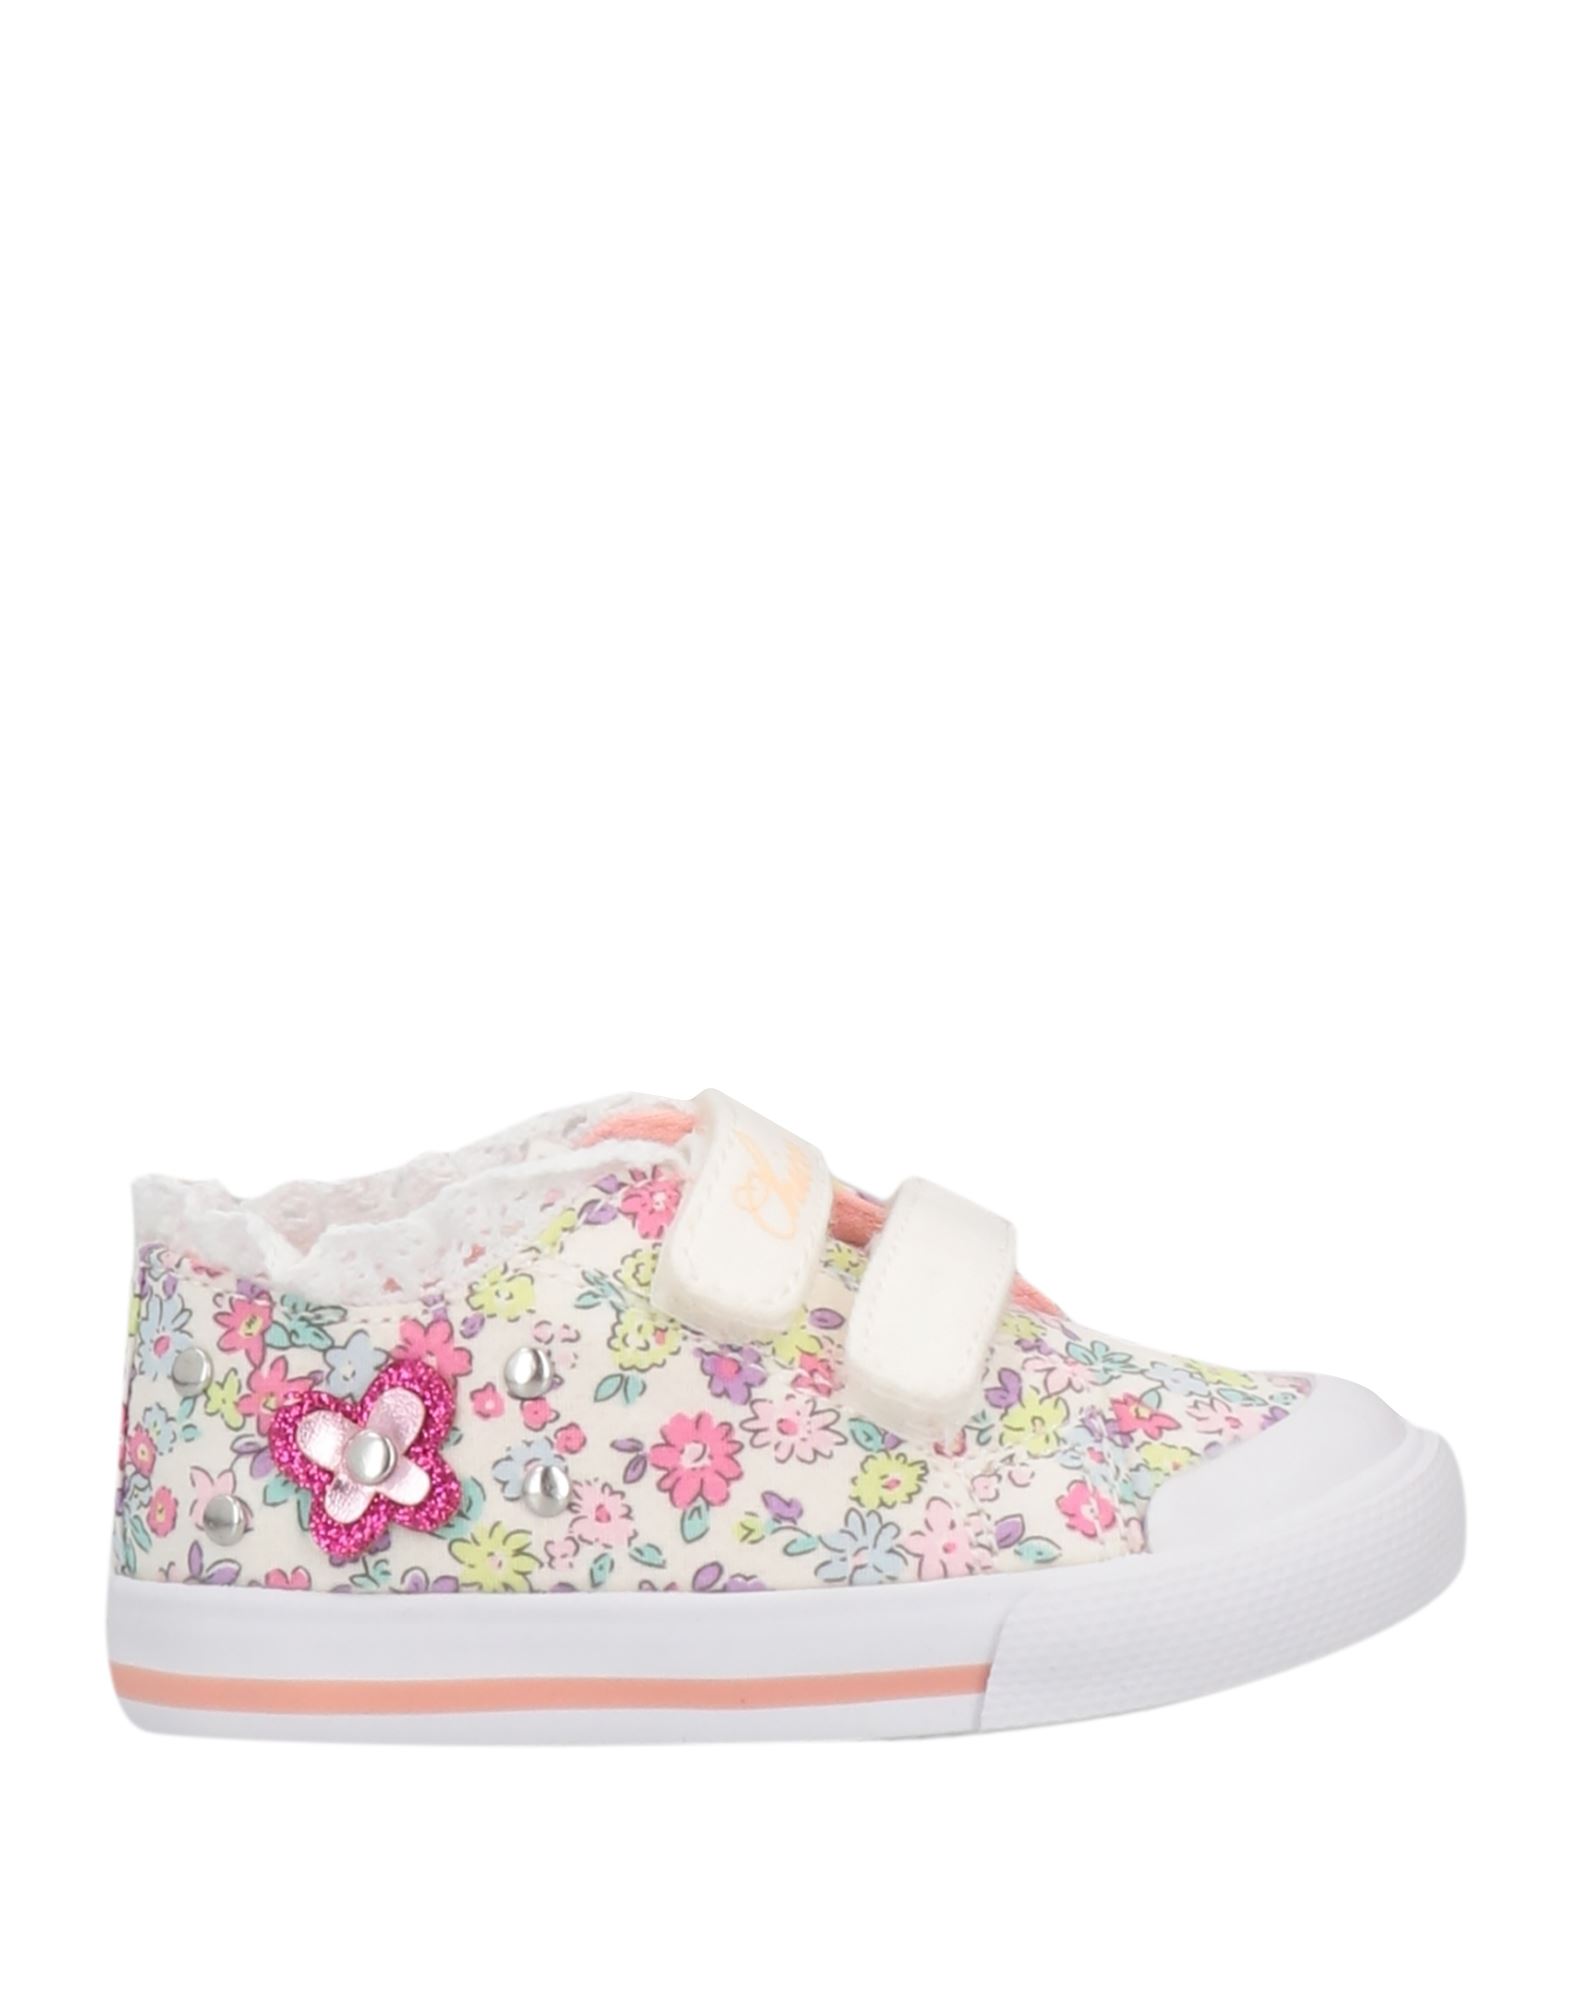 CHICCO Sneakers Kinder Weiß von CHICCO